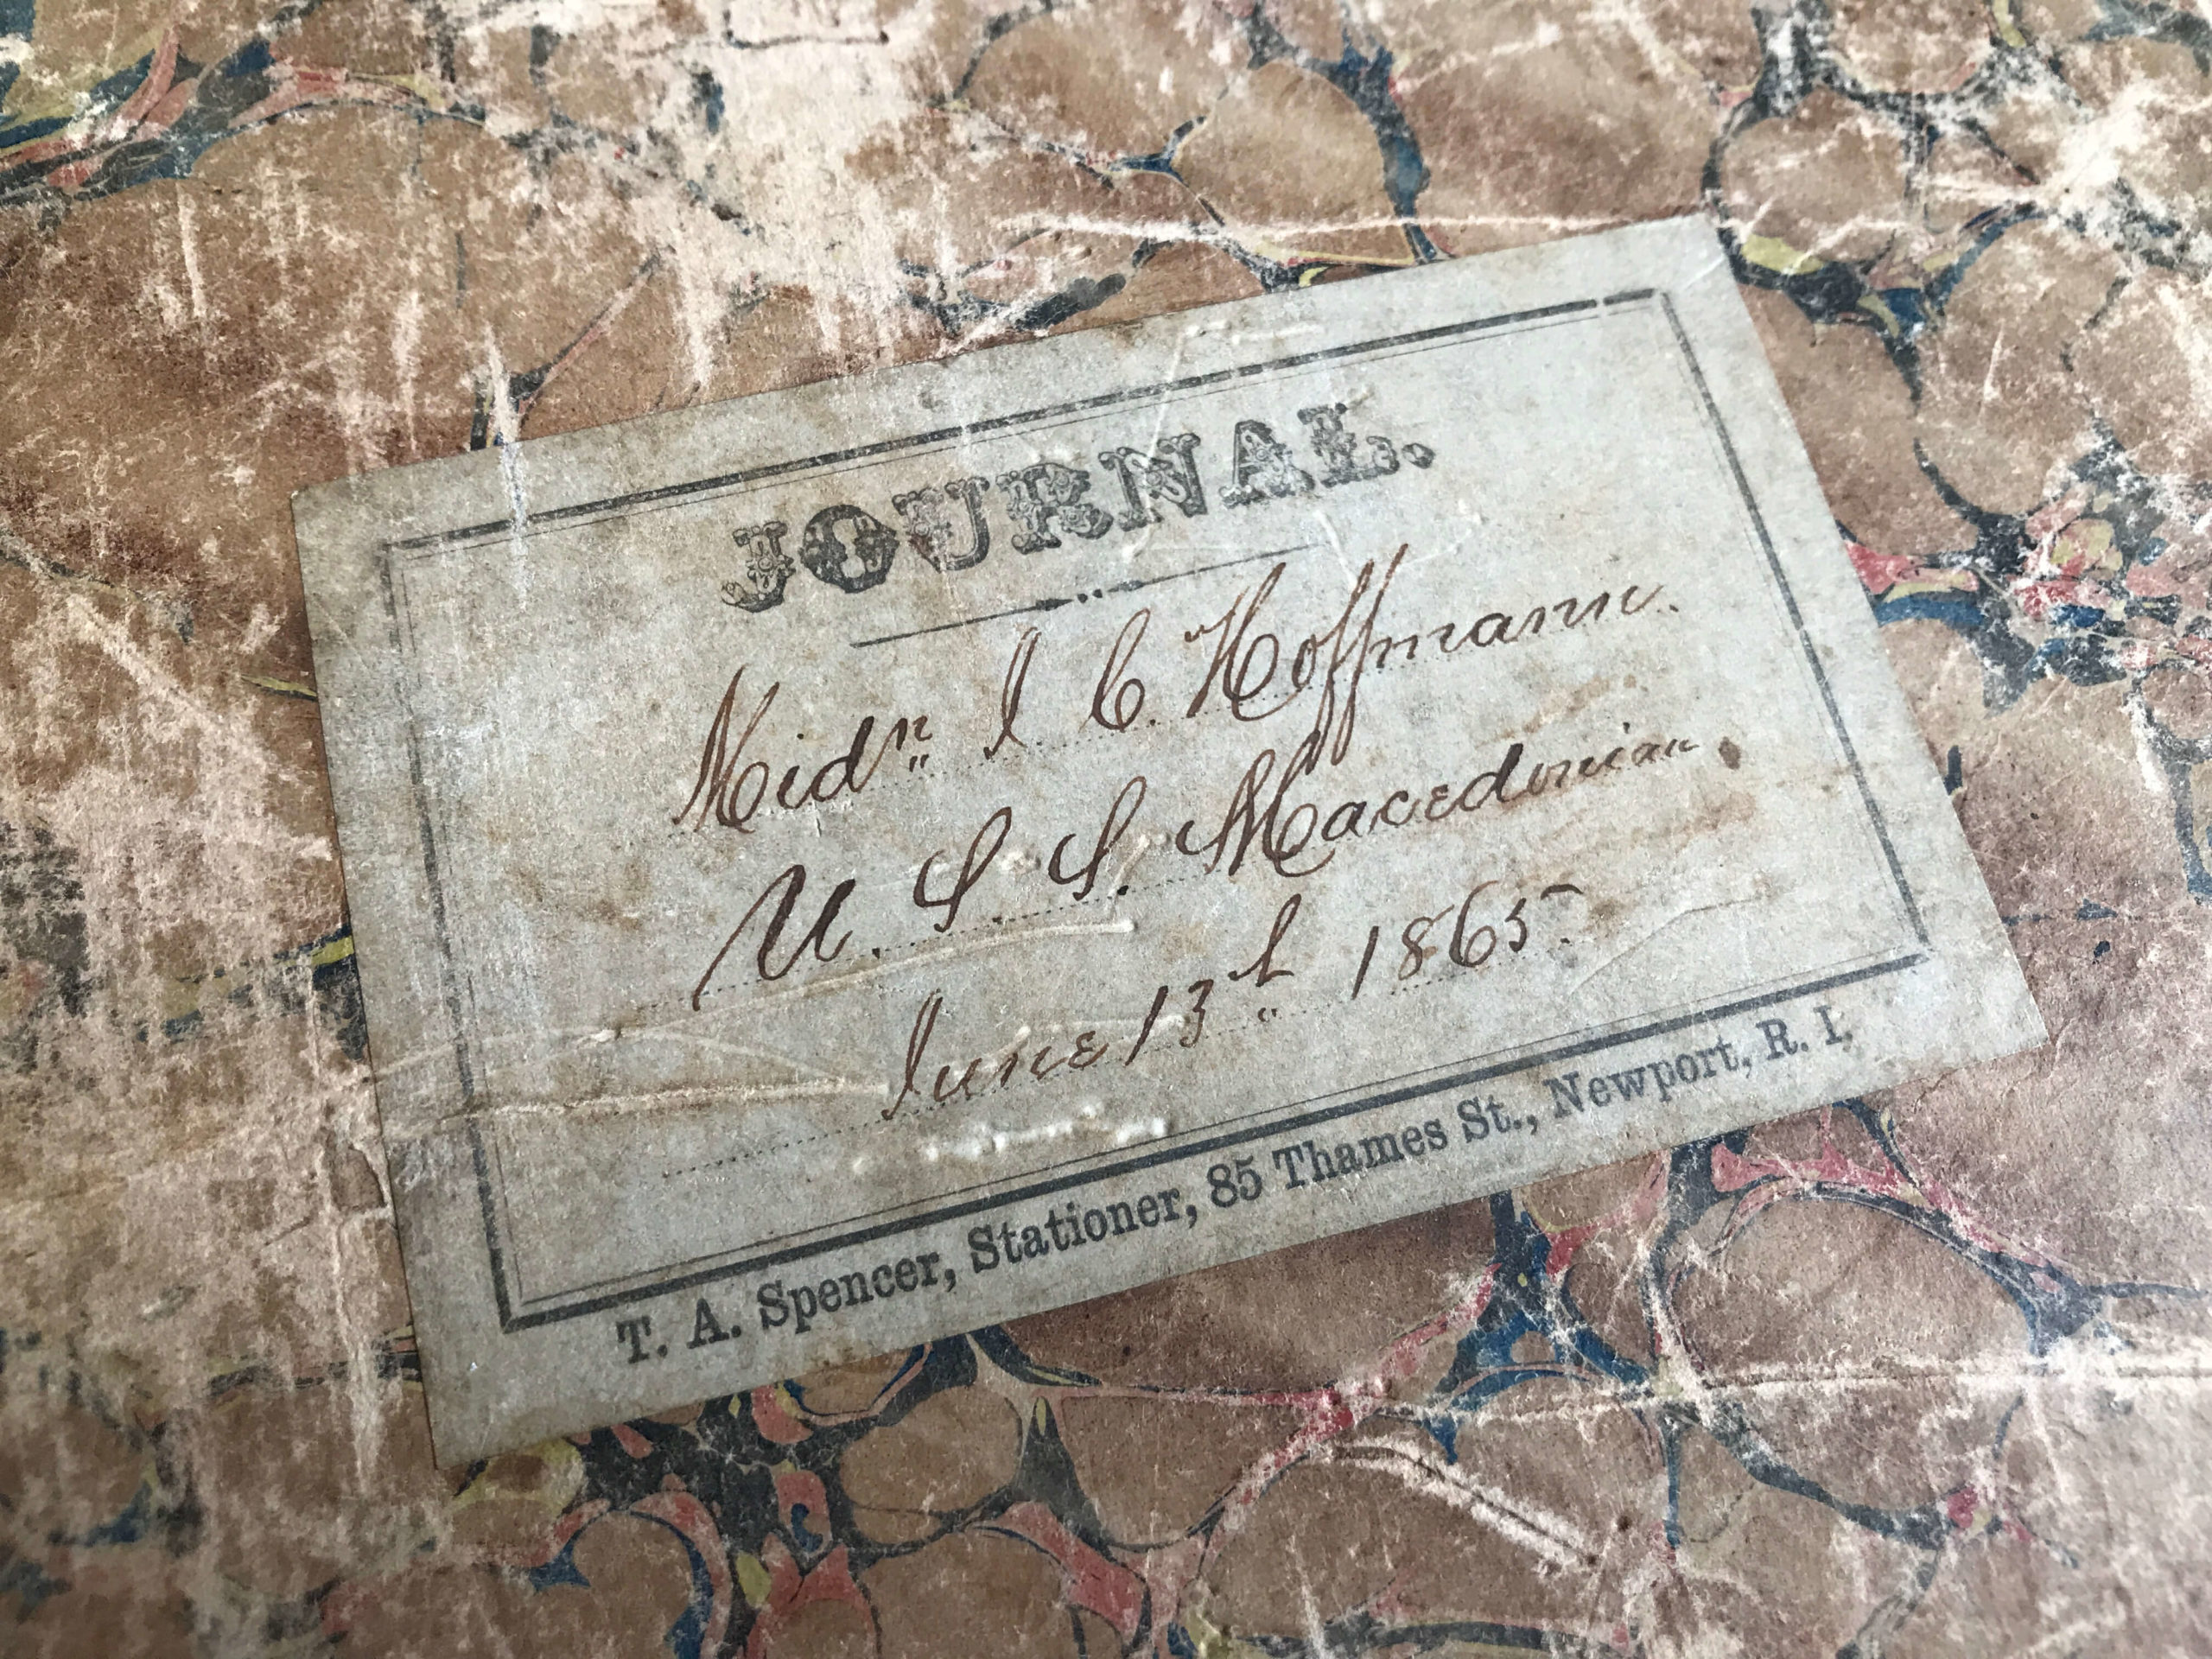 Logbook for USS Macedonian kept by midshipman C. Hoffman, 1865. [Commodores Fund Purchase]